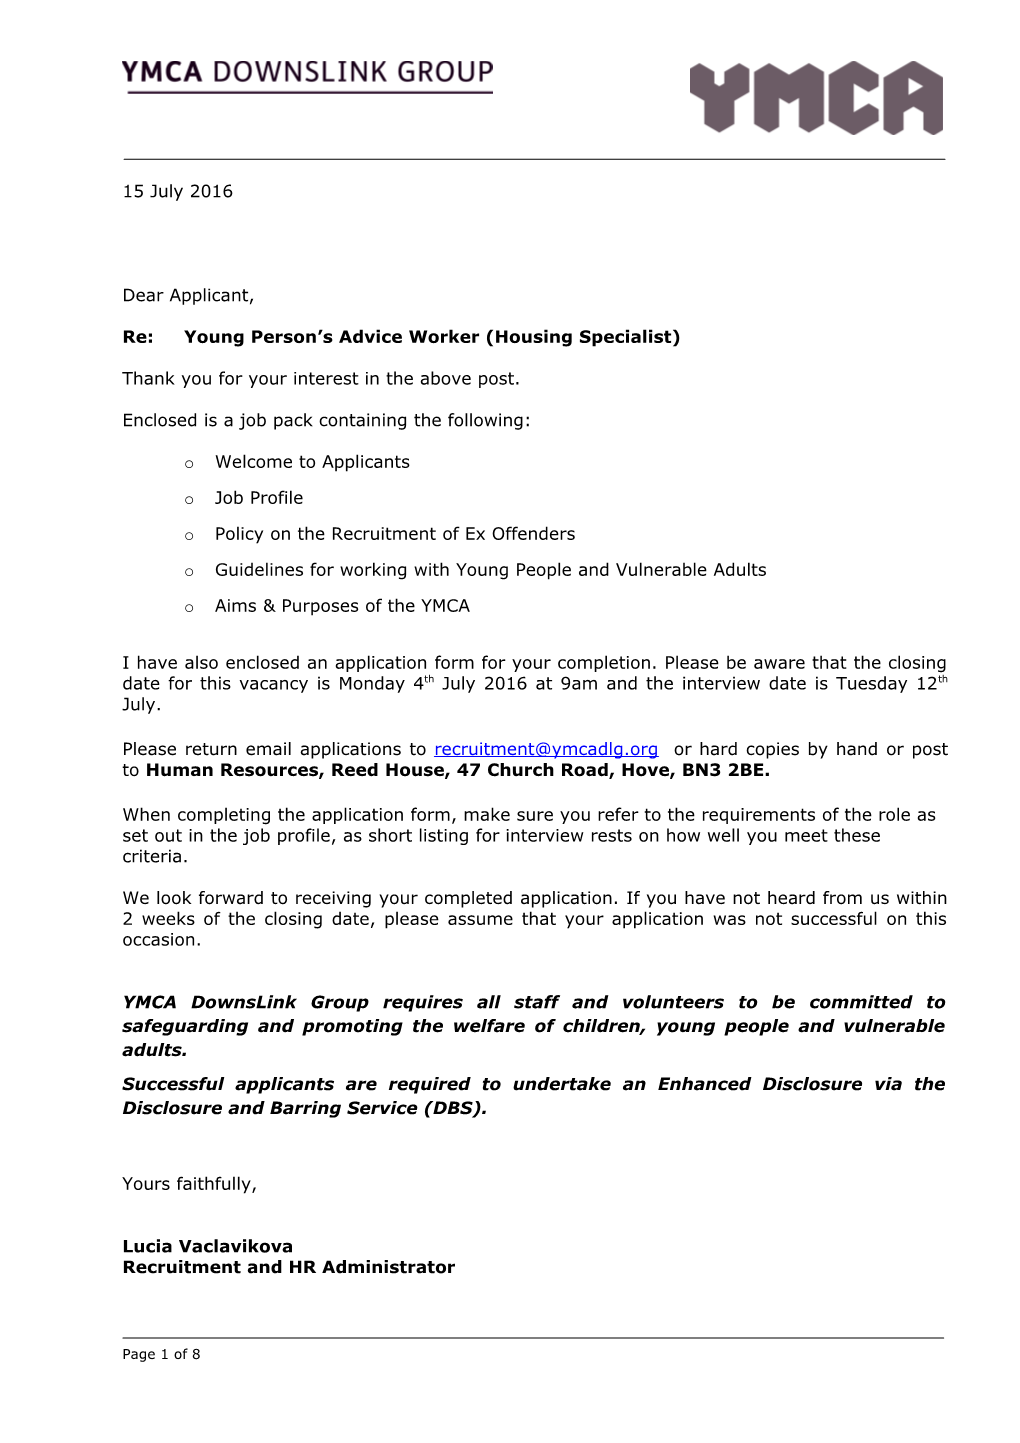 Re: Young Person S Advice Worker (Housing Specialist)